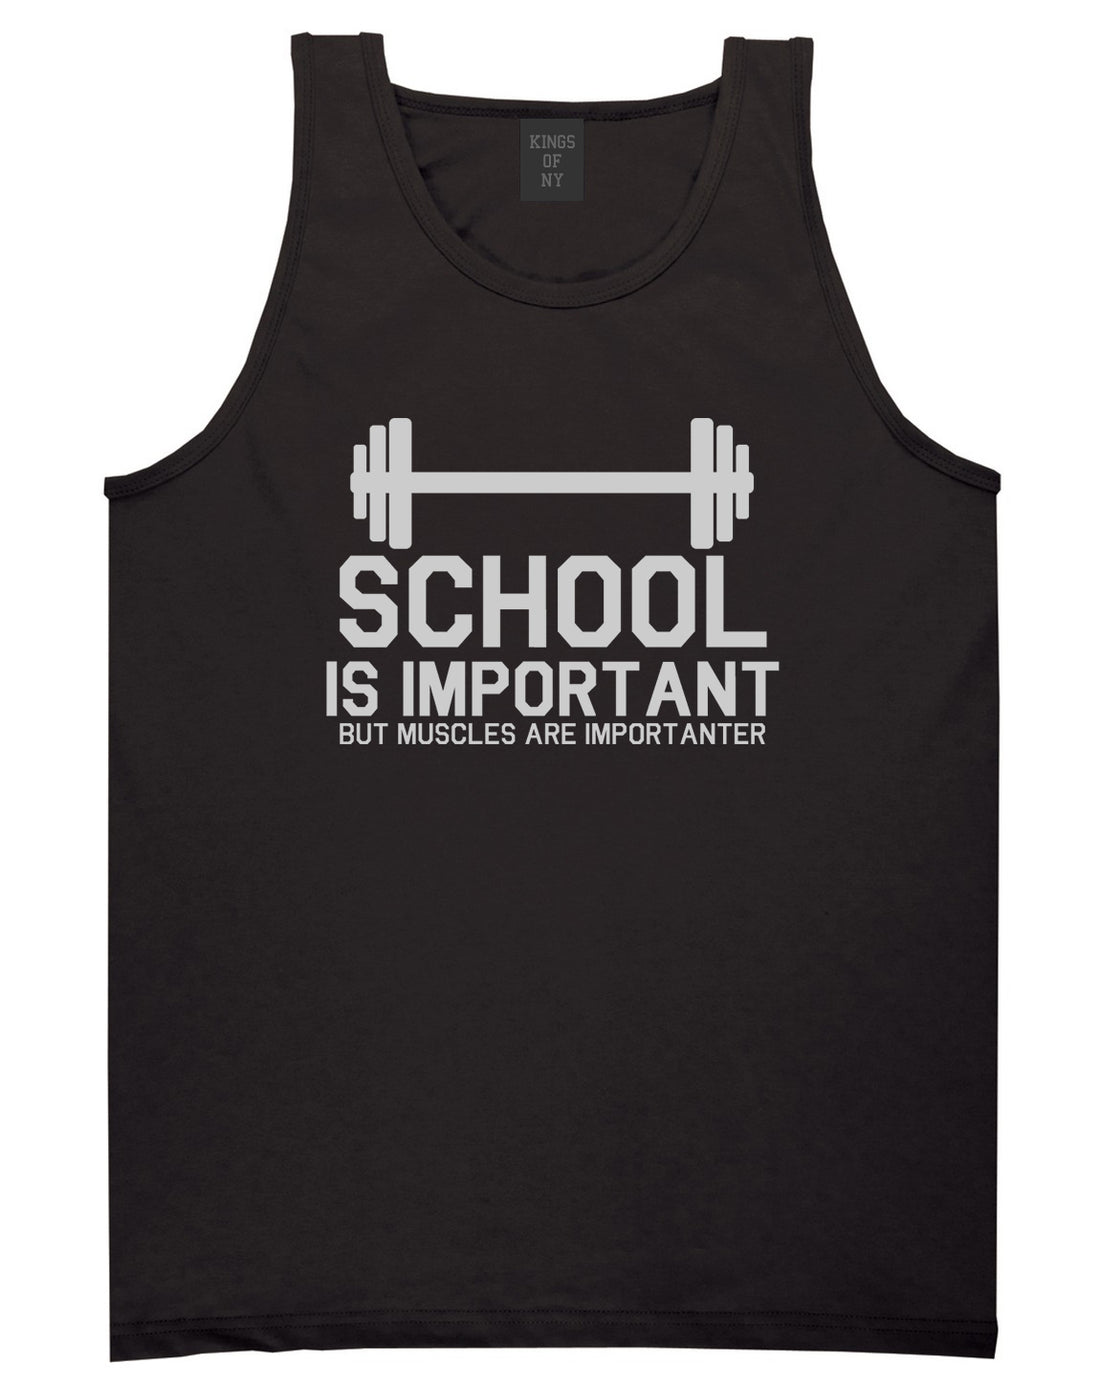 School Is Important But Muscles Are Importanter Funny Body Building Mens Tank Top T-Shirt Black